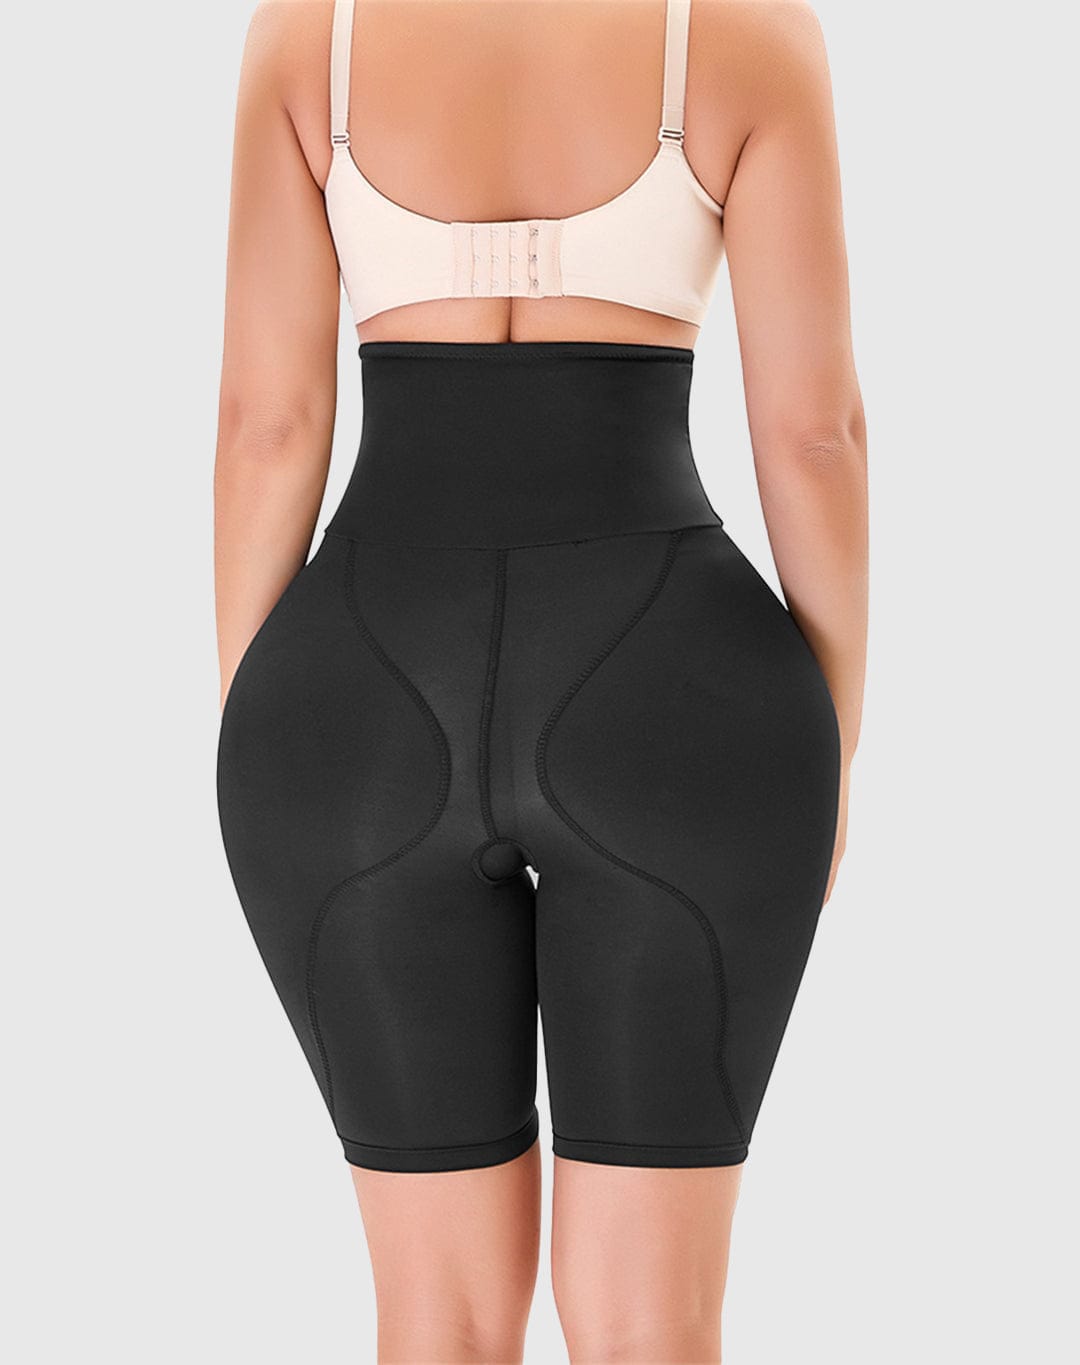 I'm plus size but don't have much of a bum so I tried the viral BBL shorts  and was amazed at the results